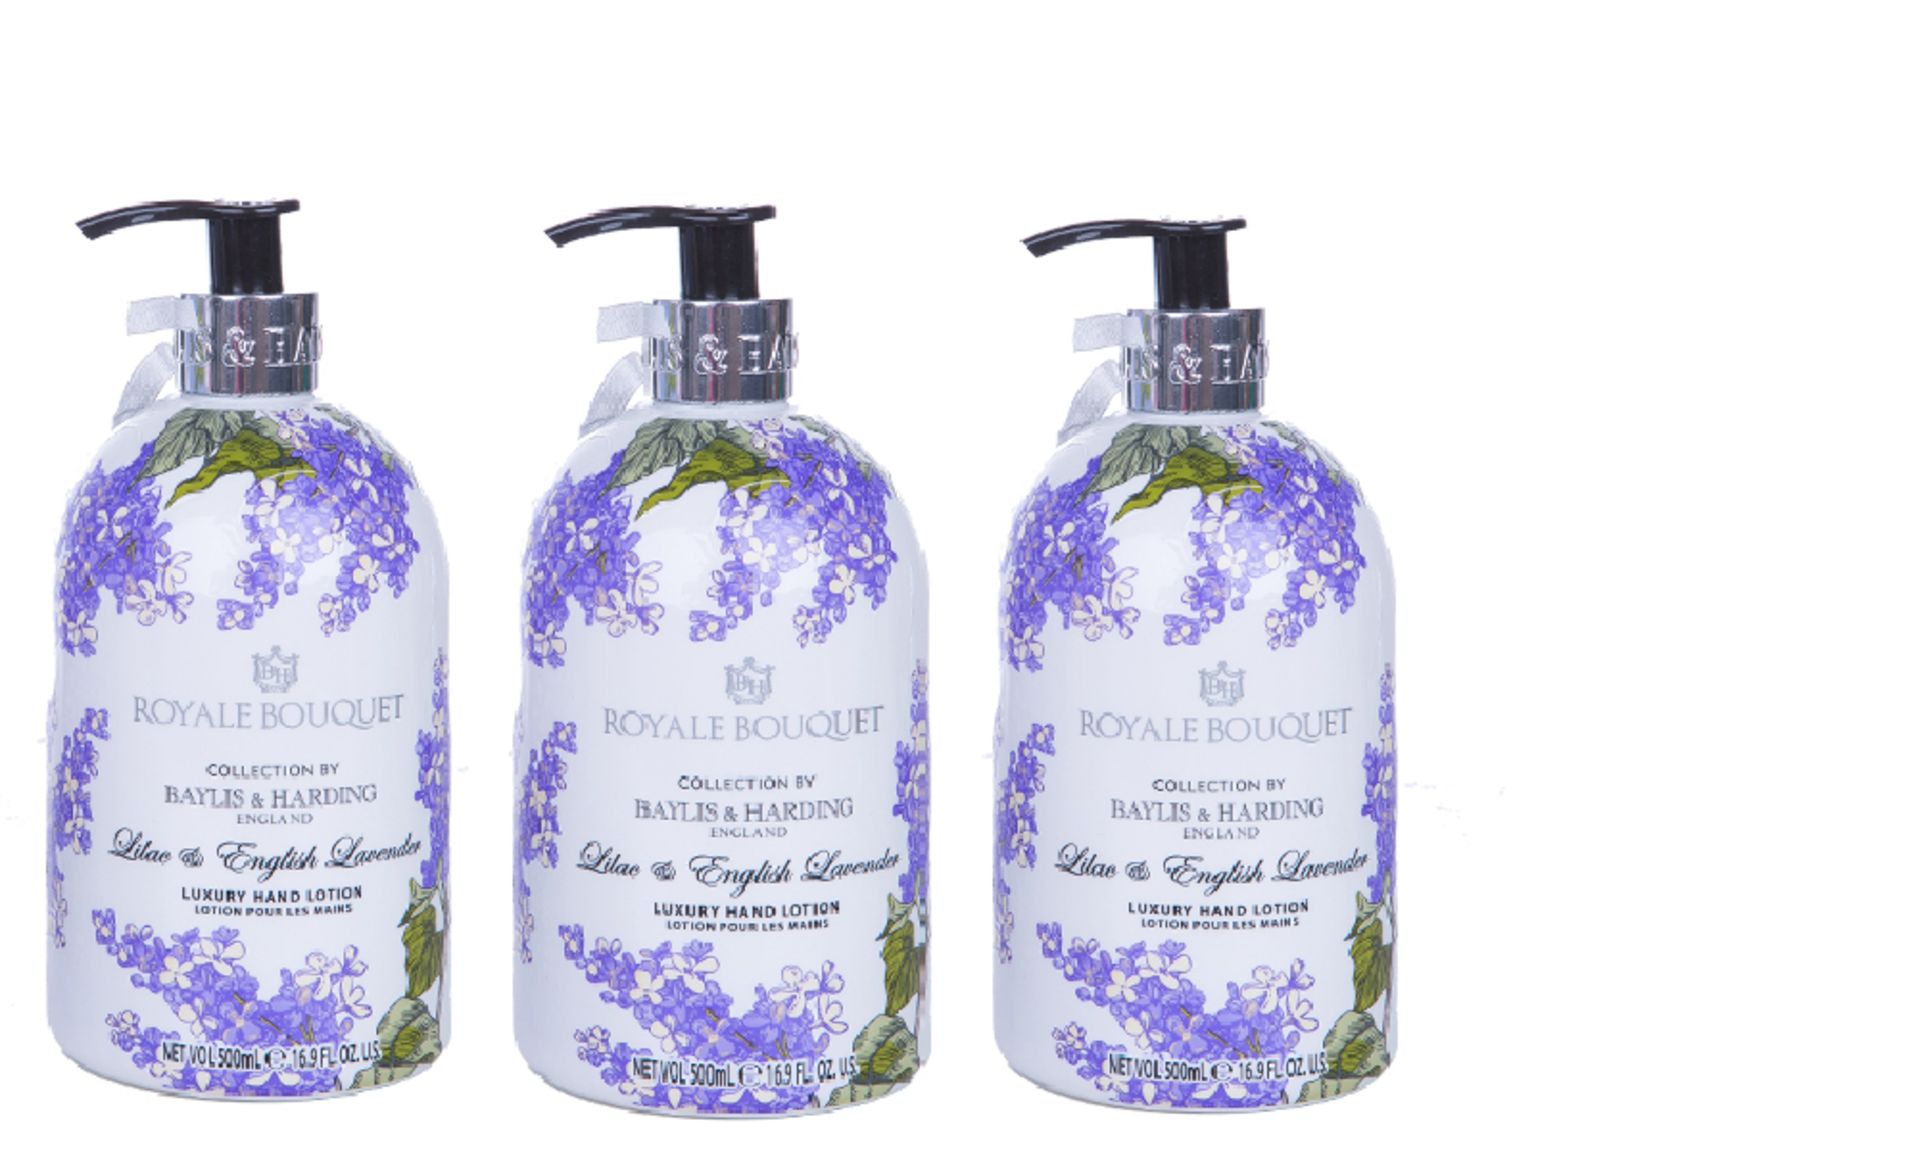 V *TRADE QTY* Brand New 3 x 500ml Baylis and Harding Lilac and Lavener Hand Wash Total ISP £9.00 X